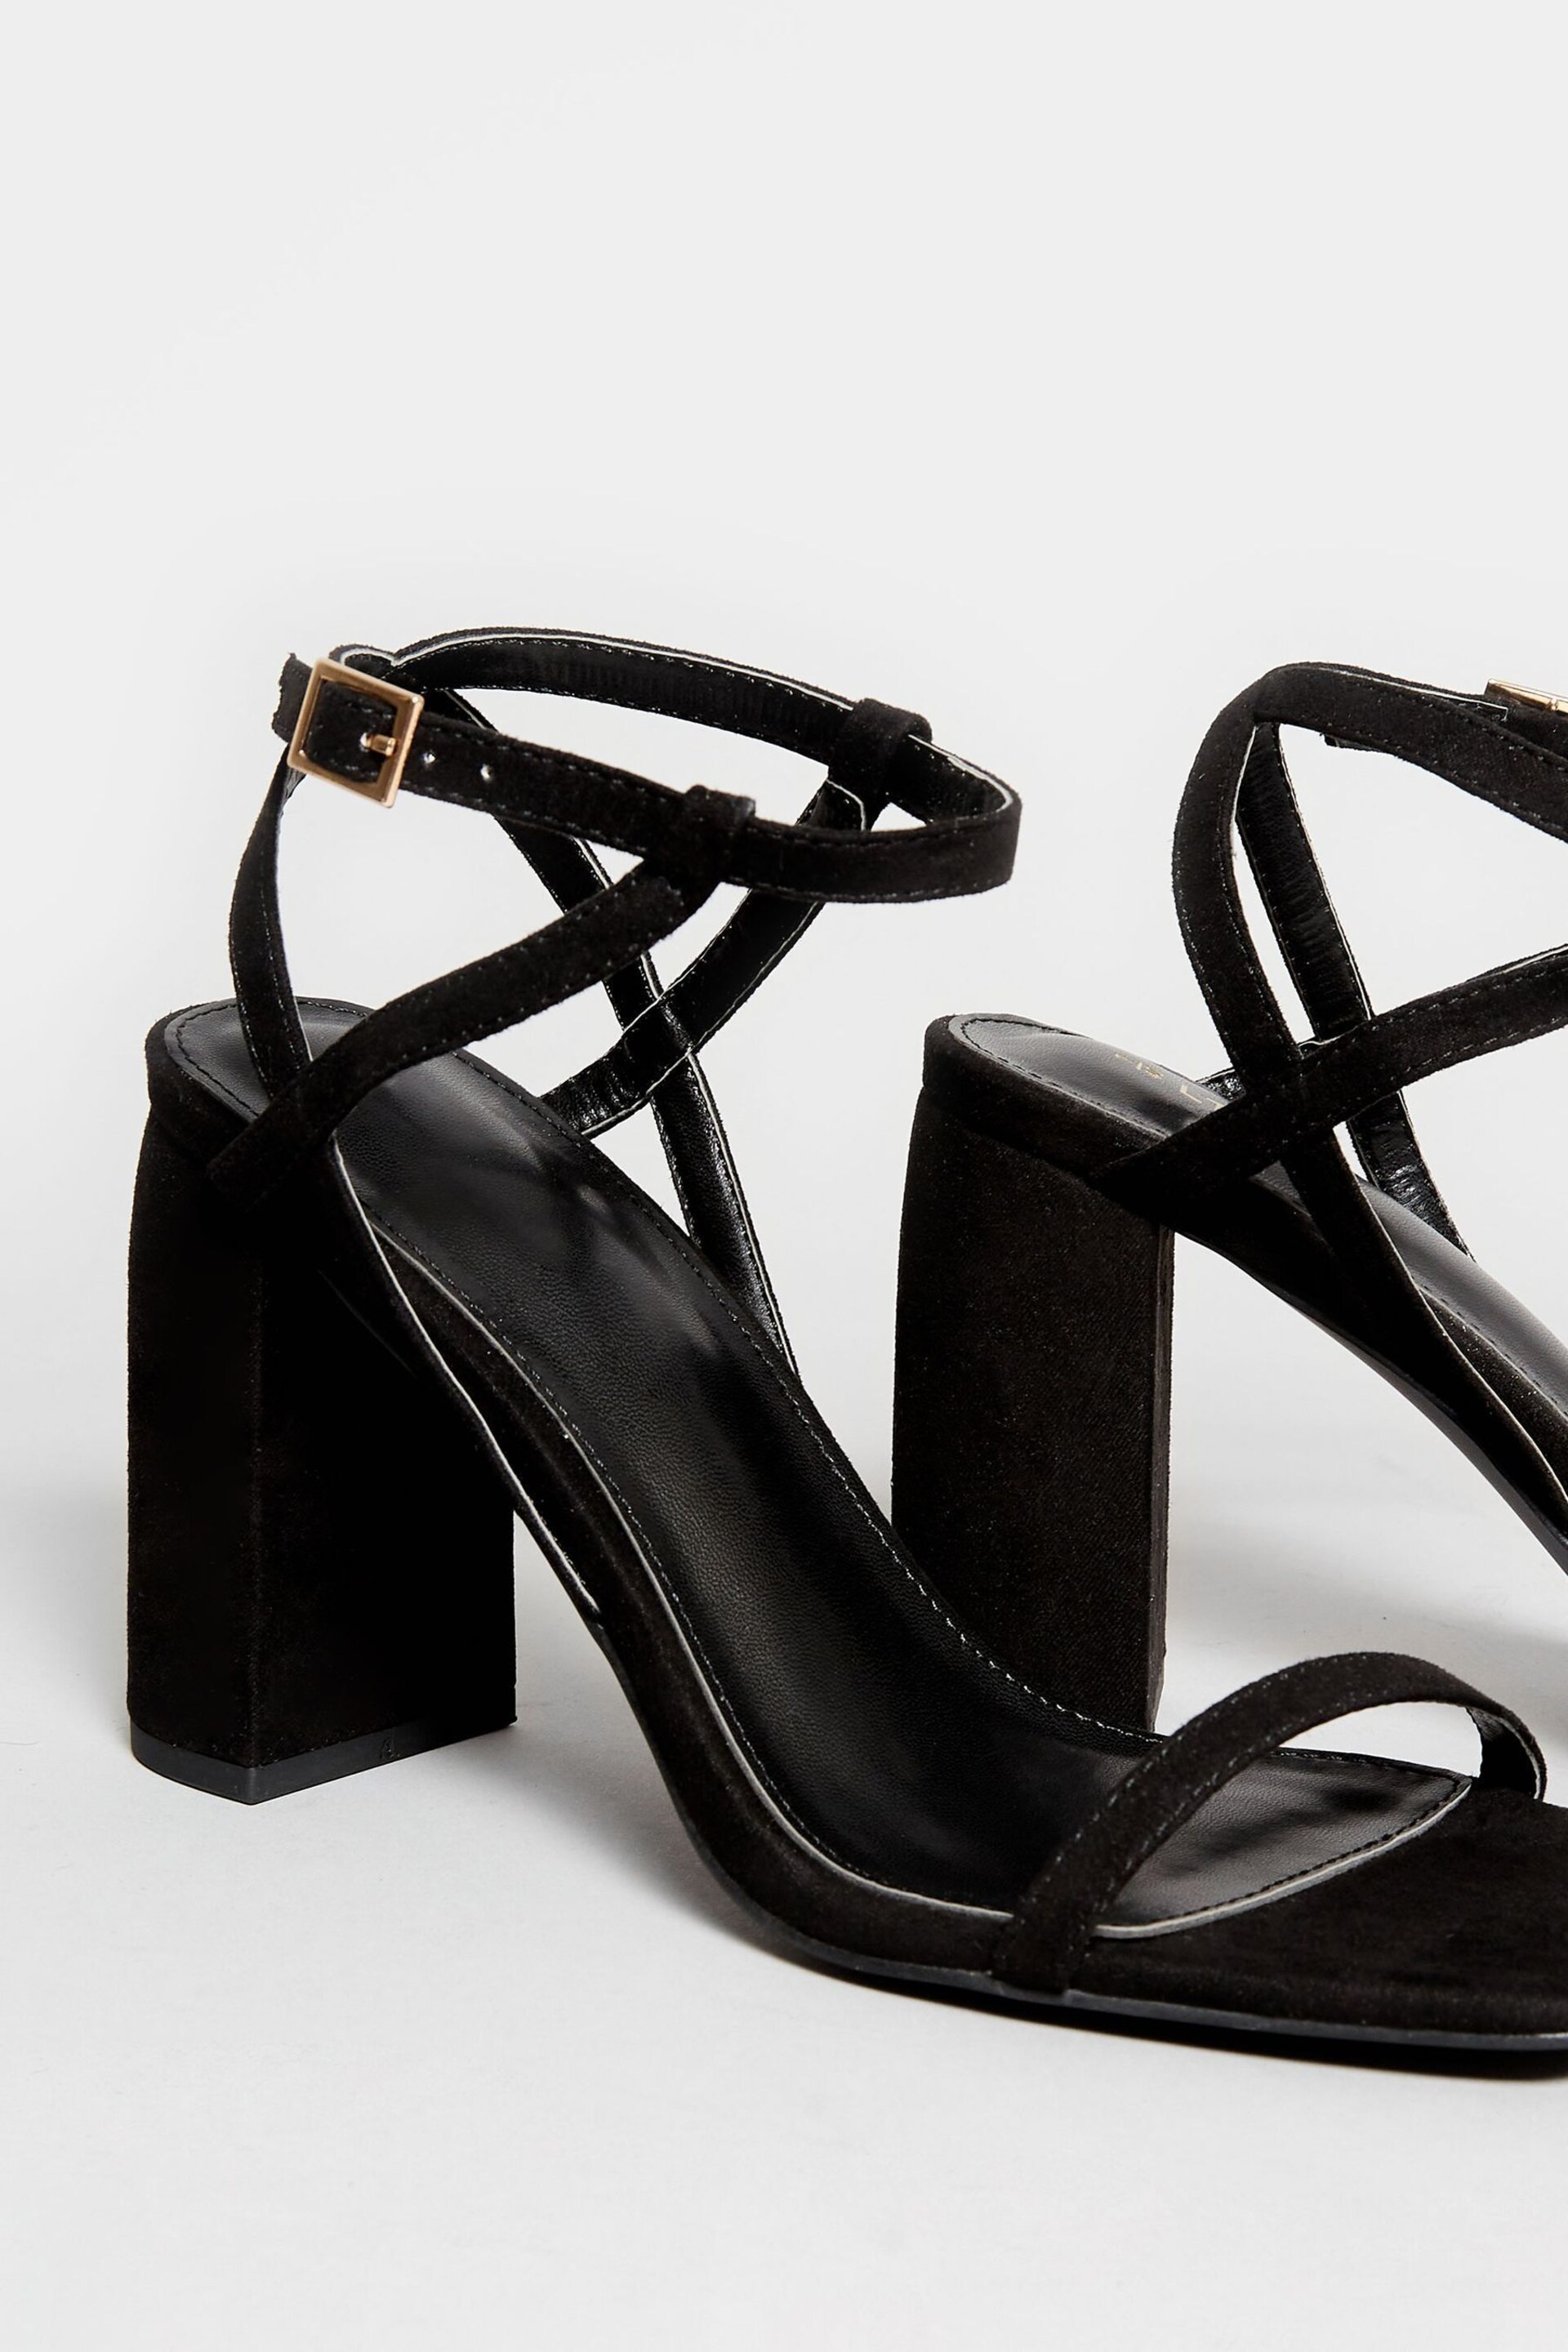 Long Tall Sally Black Faux Suede Block Heels - Image 5 of 6